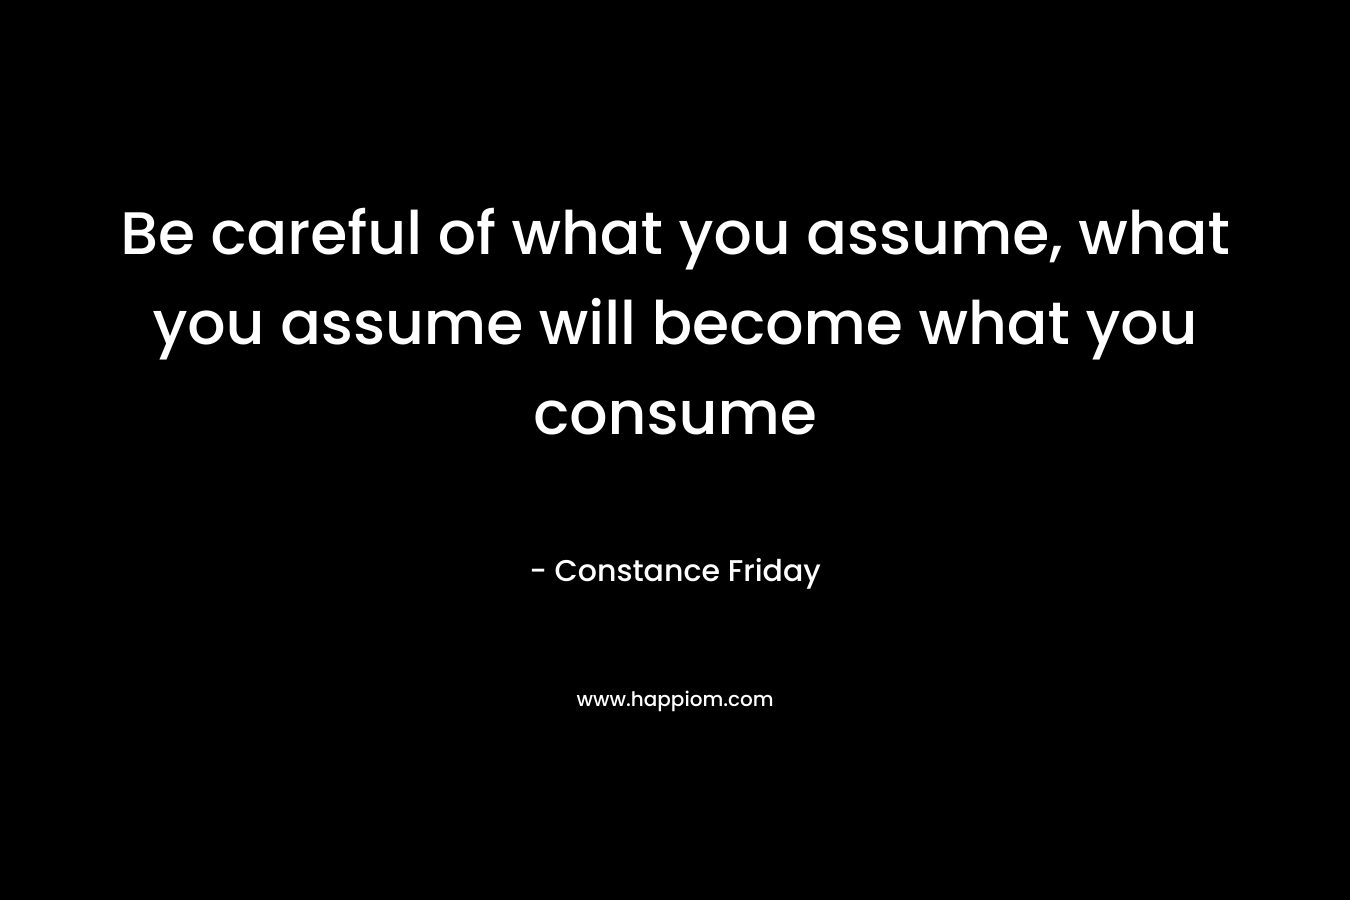 Be careful of what you assume, what you assume will become what you consume – Constance Friday